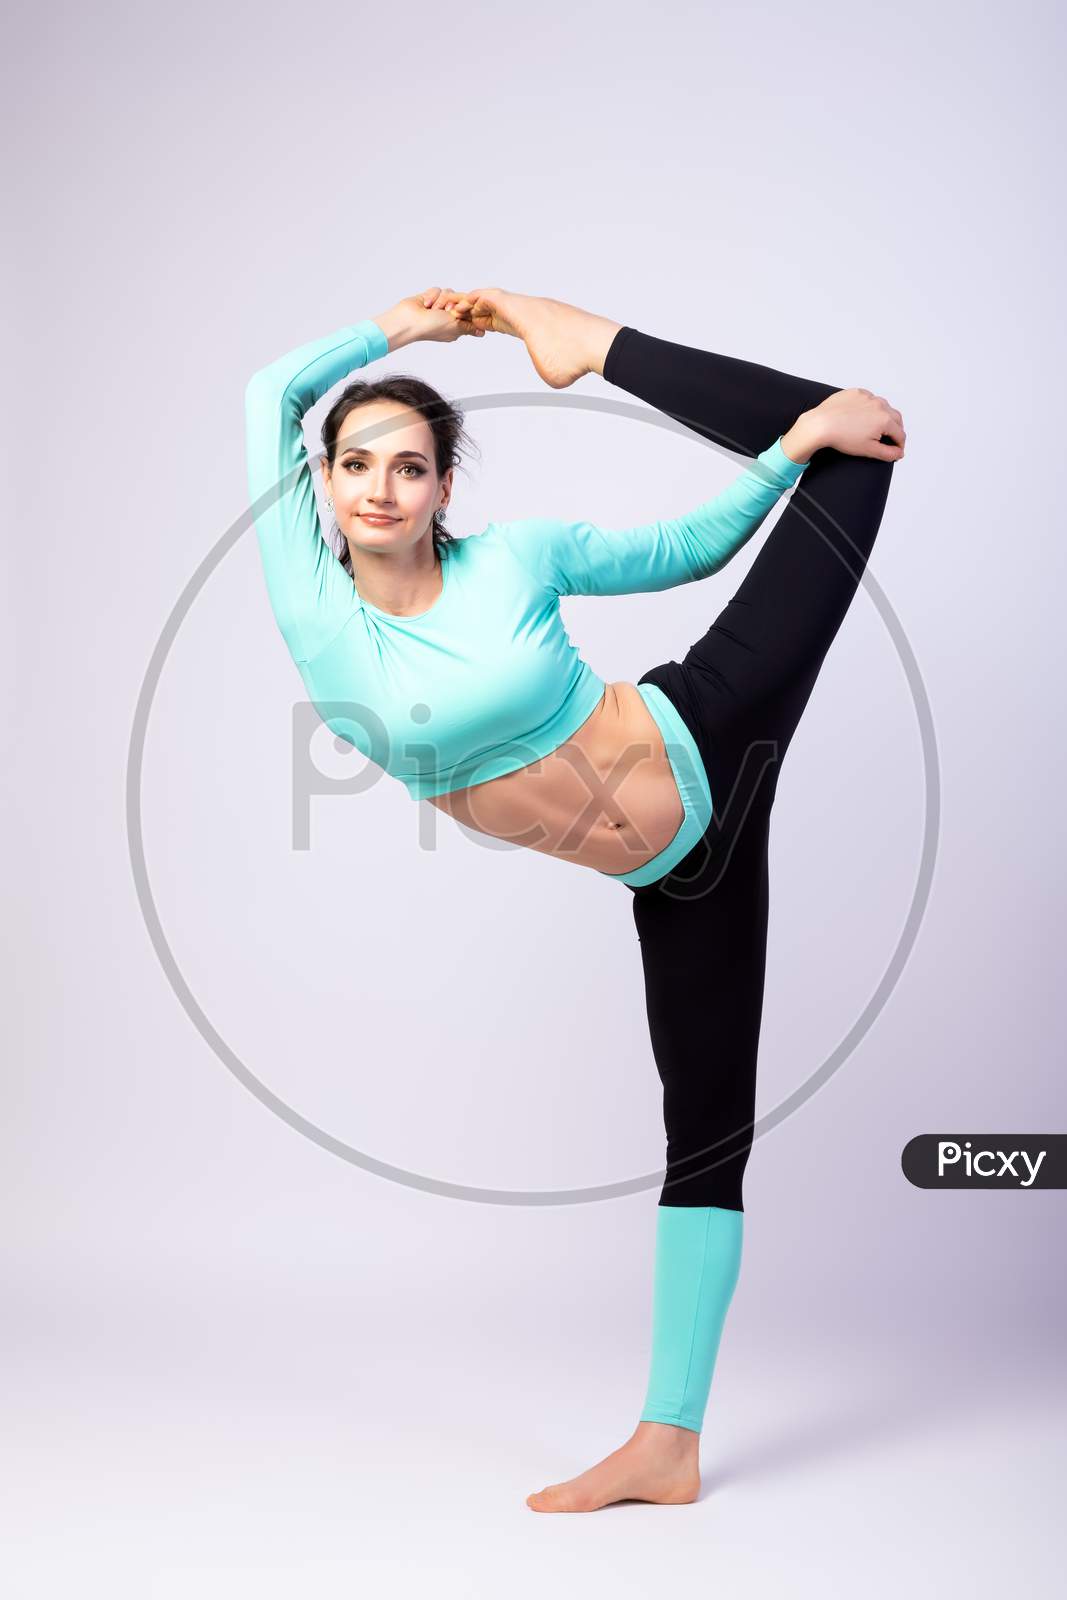 A Young Woman Coach Stretch   On A  White Isolated Background In Studio. The Concept Of Sports And Meditation. Training For Stretching